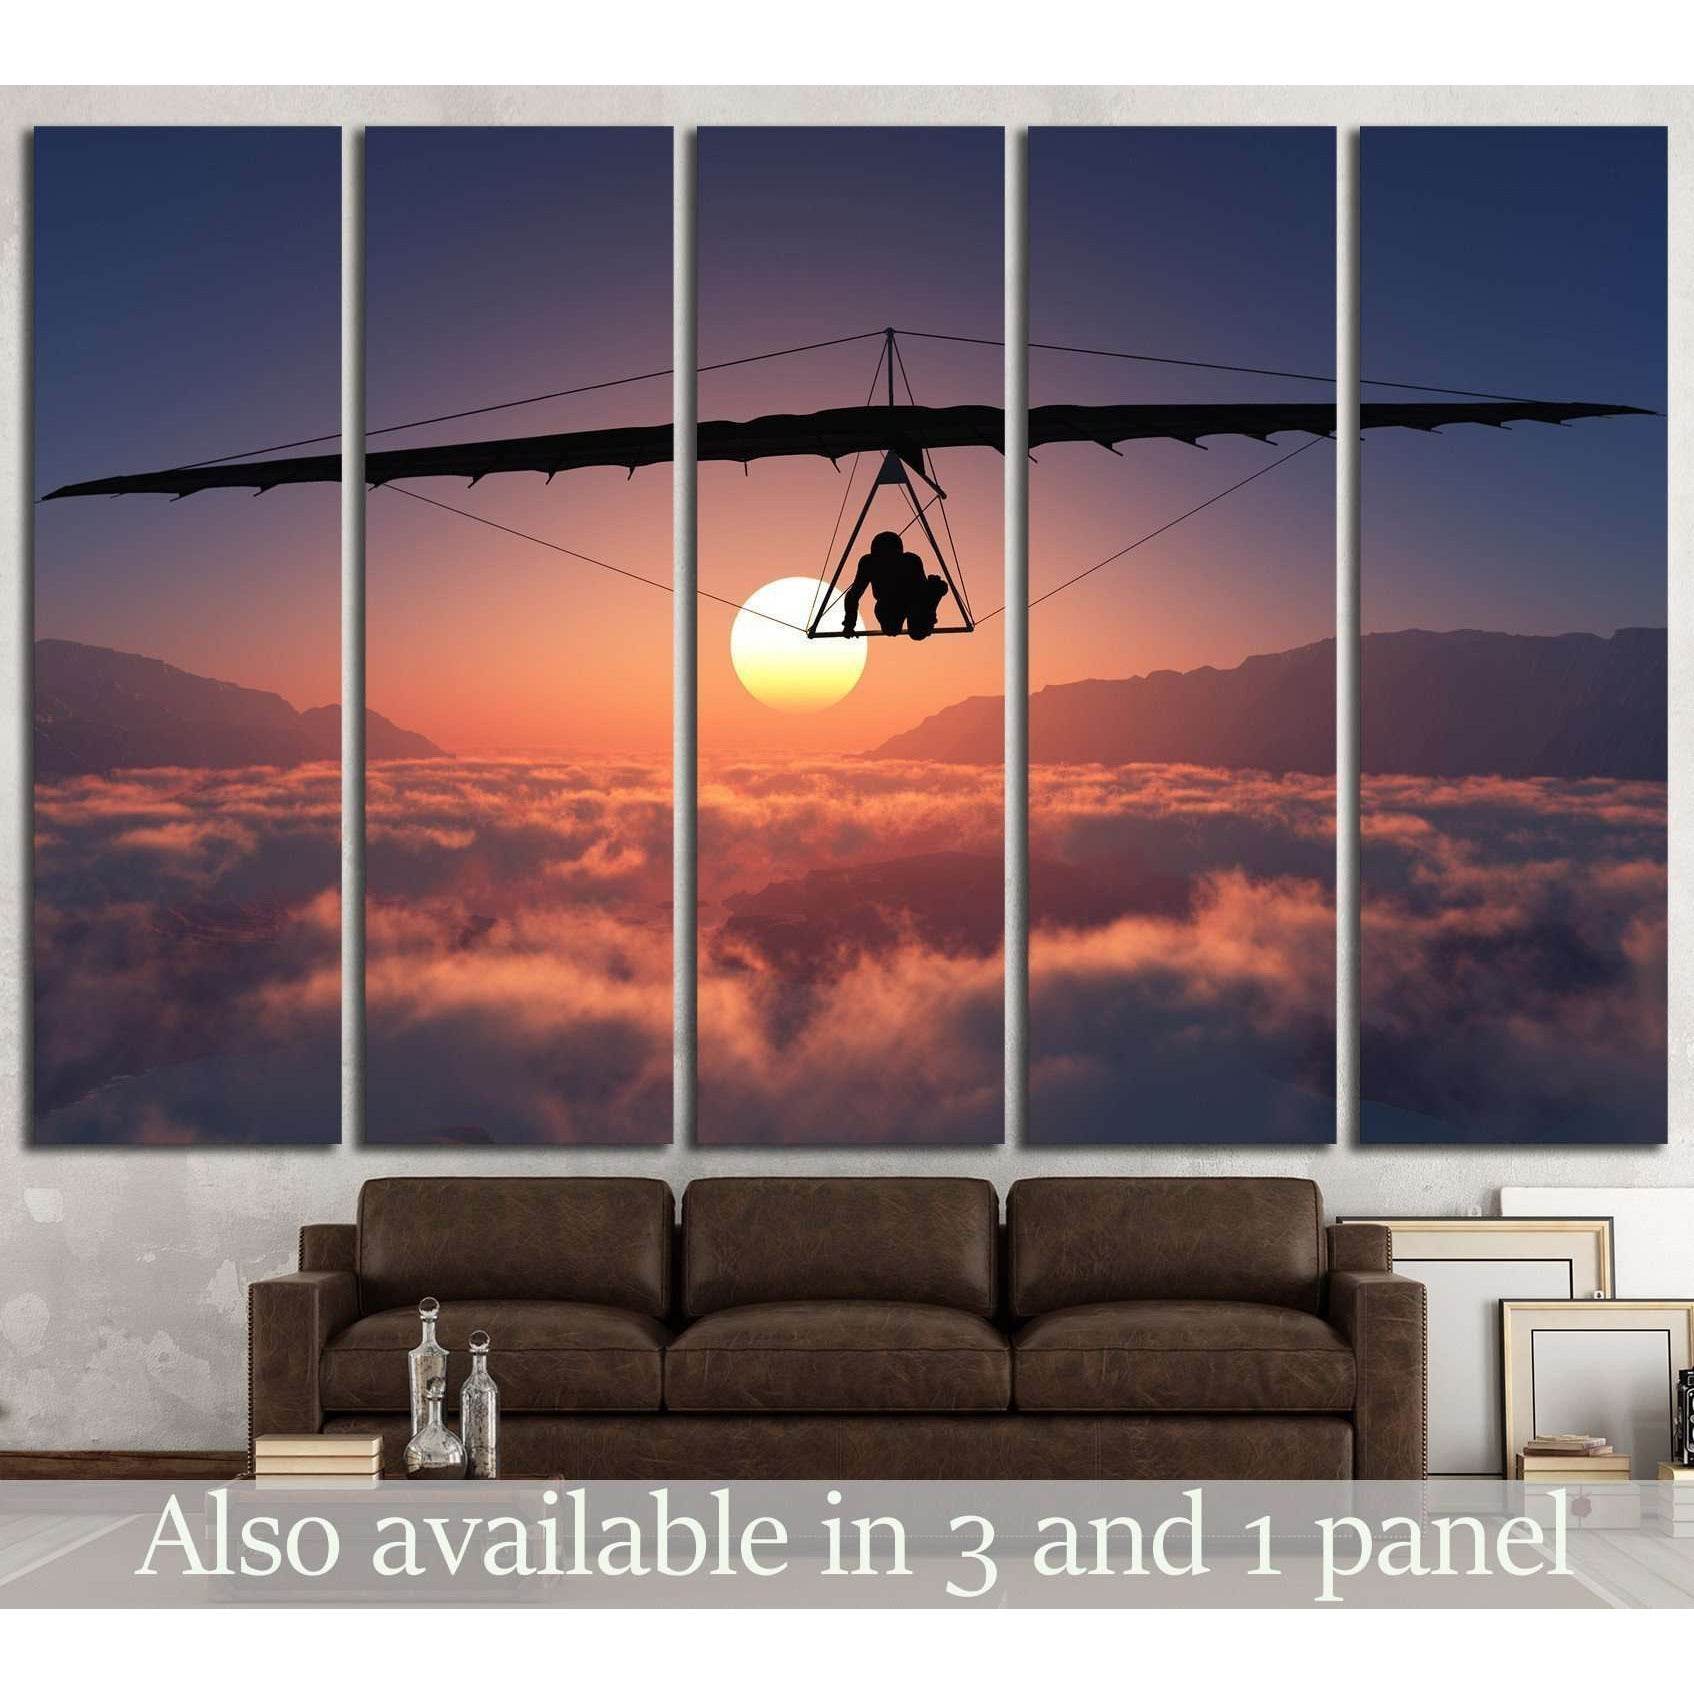 Sports radical against on sunset background №1377 Ready to Hang Canvas Print